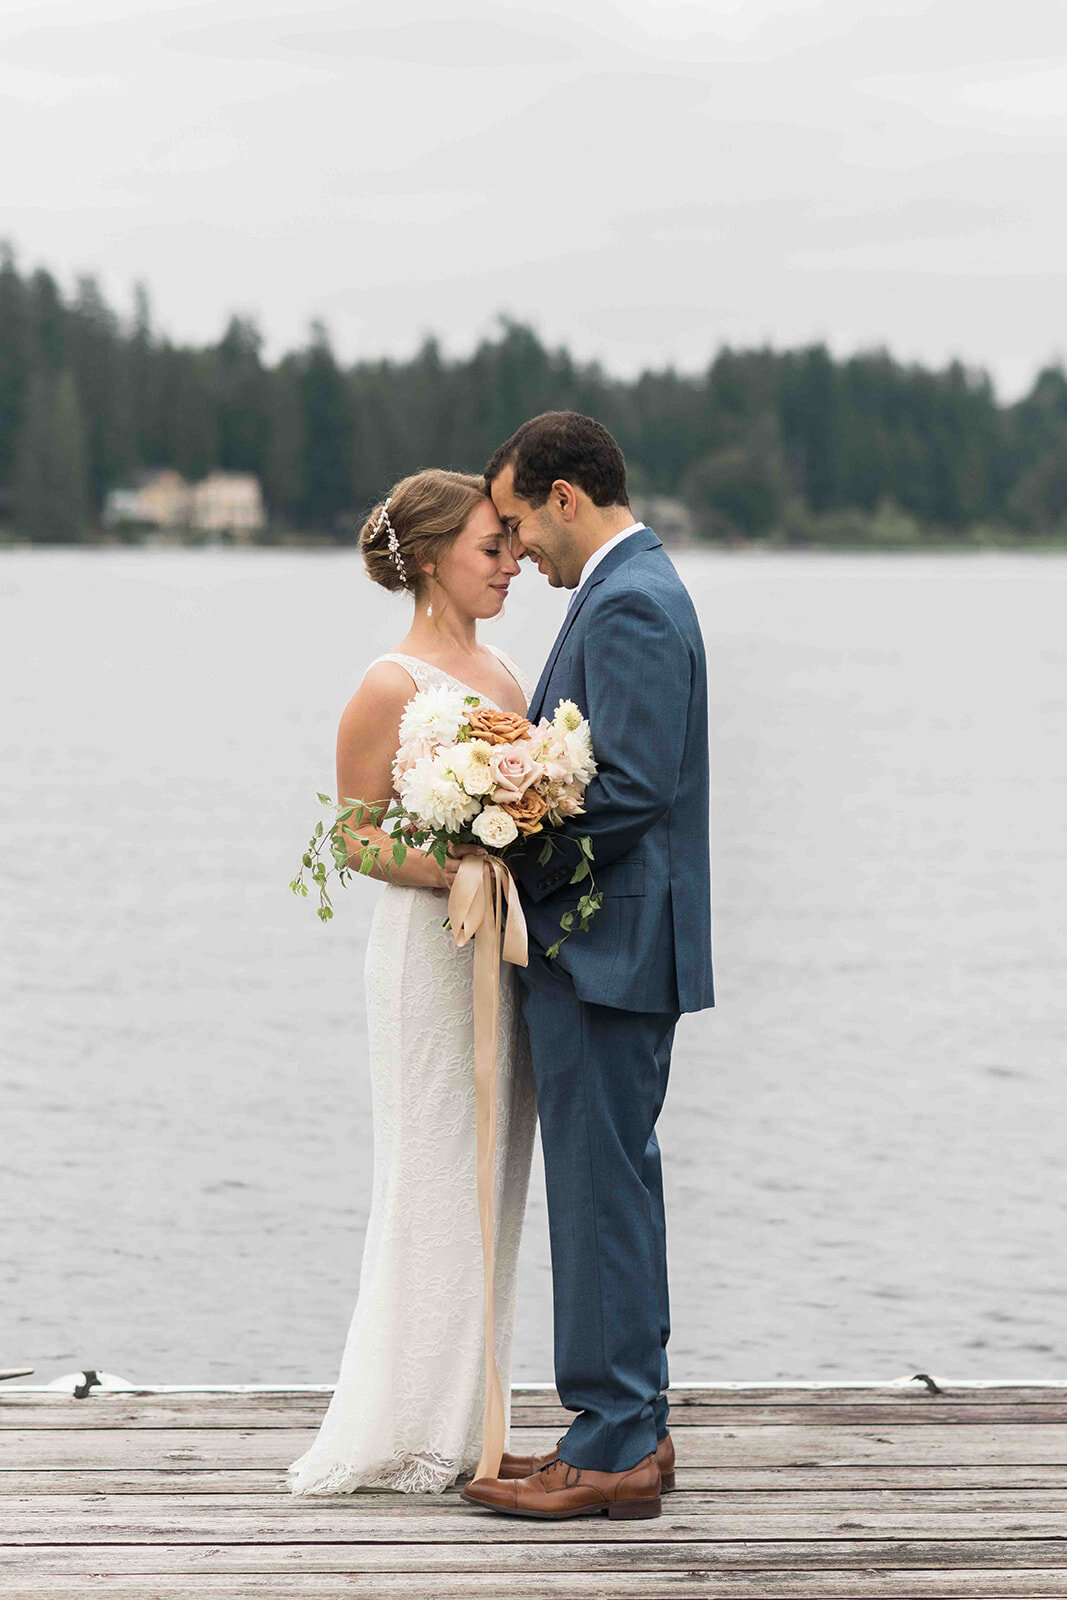 Photos by Joanna Monger Bride and Groom on the dock at Greengates at Flowing Lake